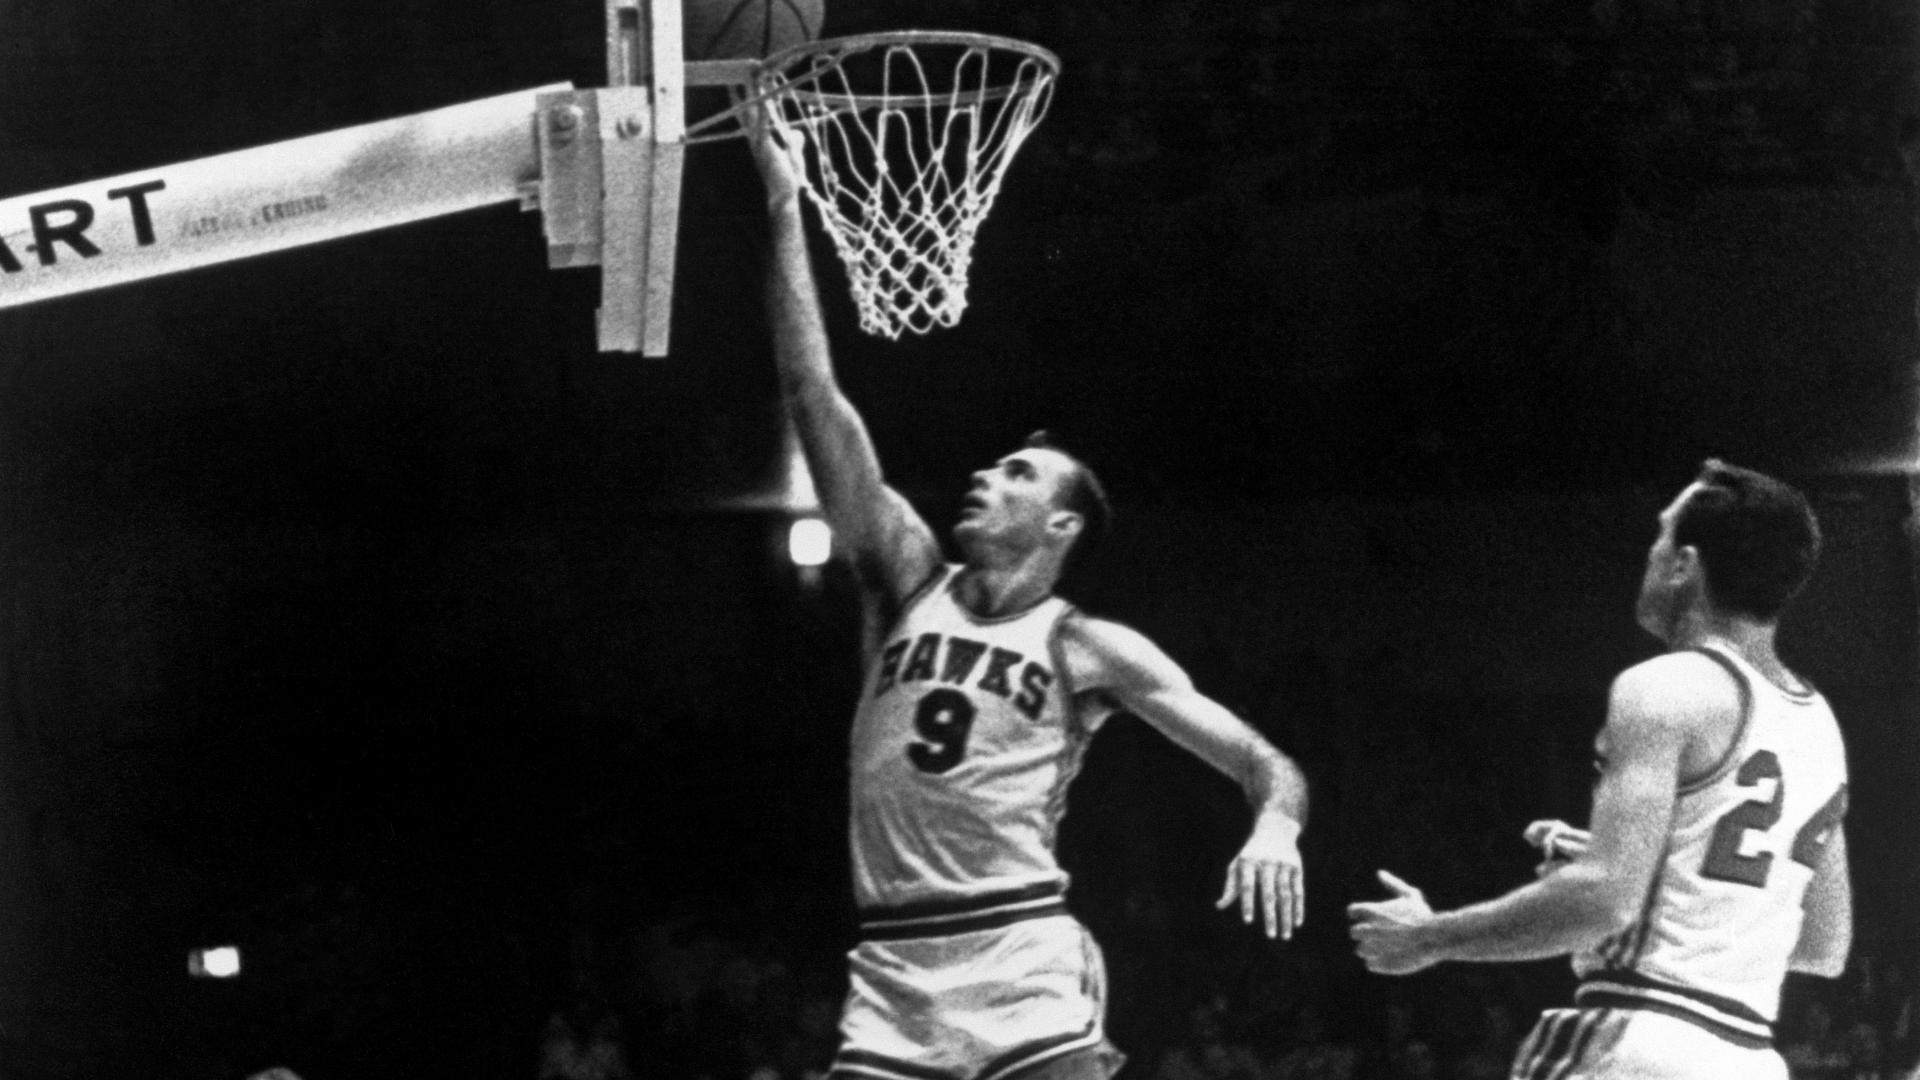 Top Moments: After years of letdowns, Bob Pettit has his revenge in 1958